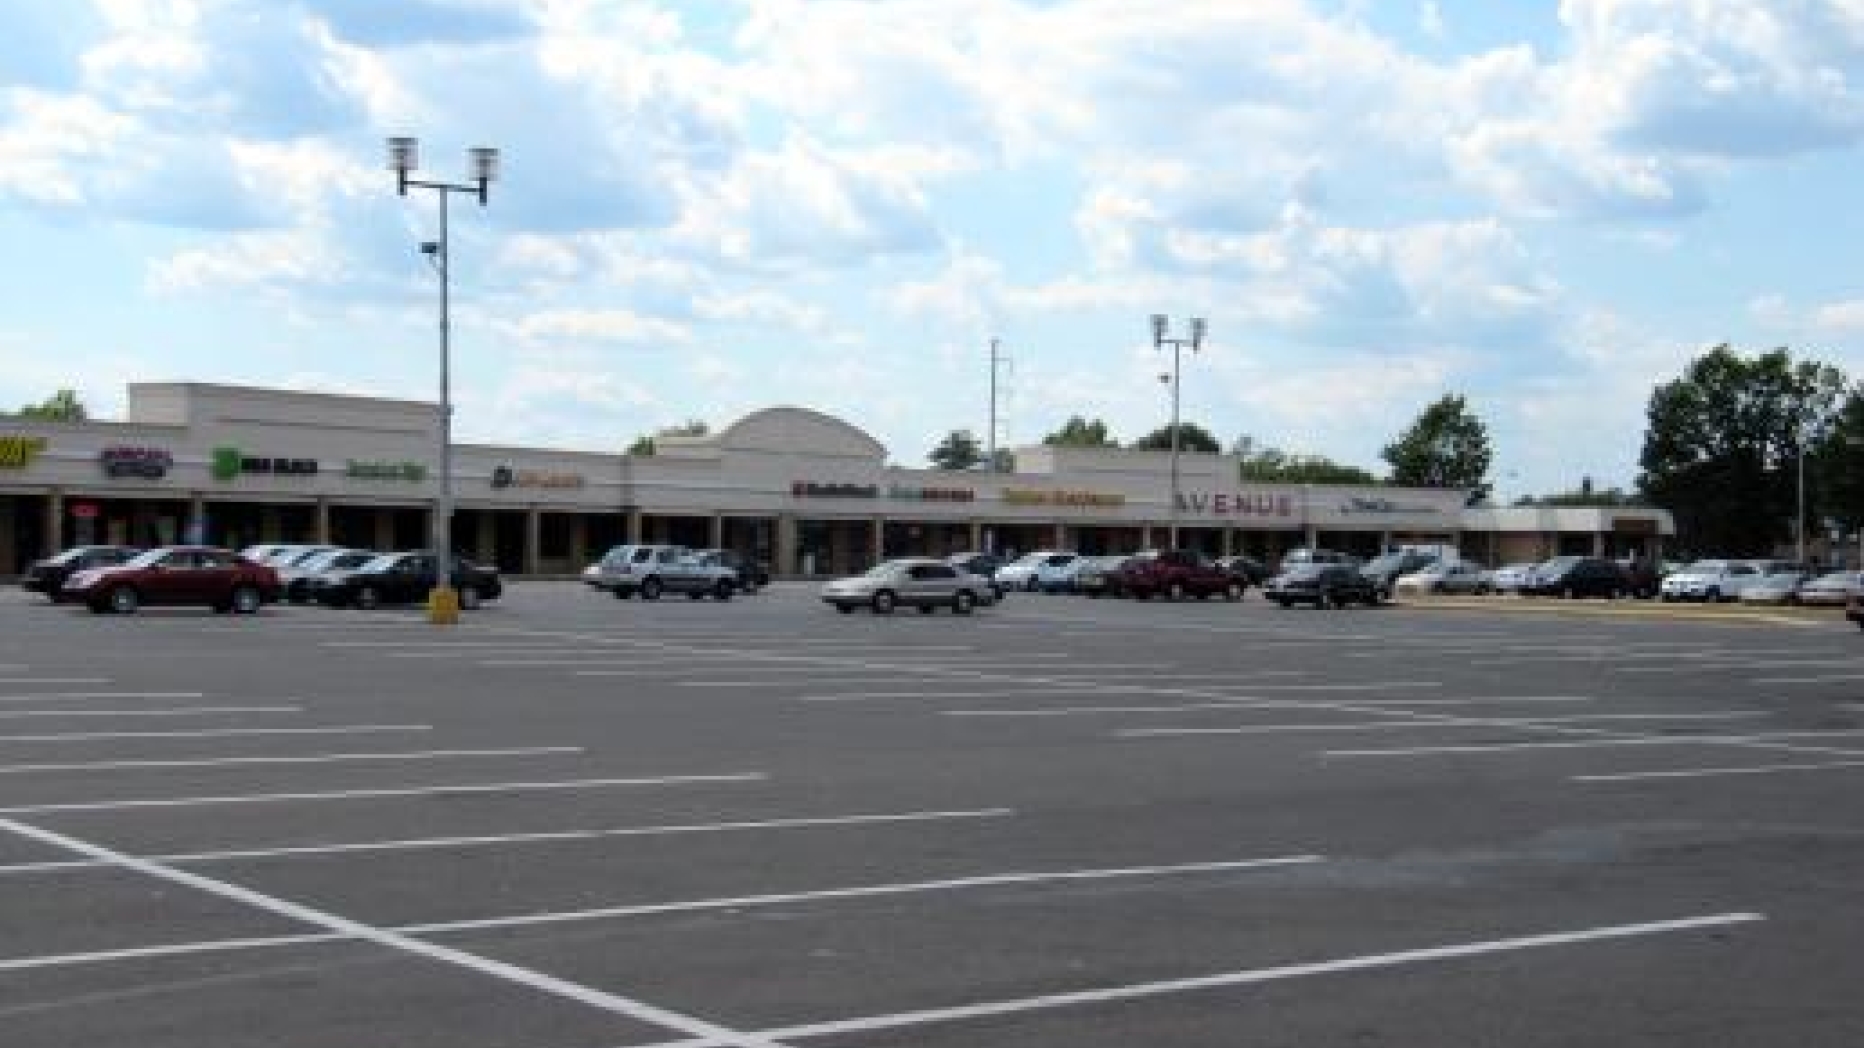 A partially filled parking lot in front of a 'strip mall' style shopping center.